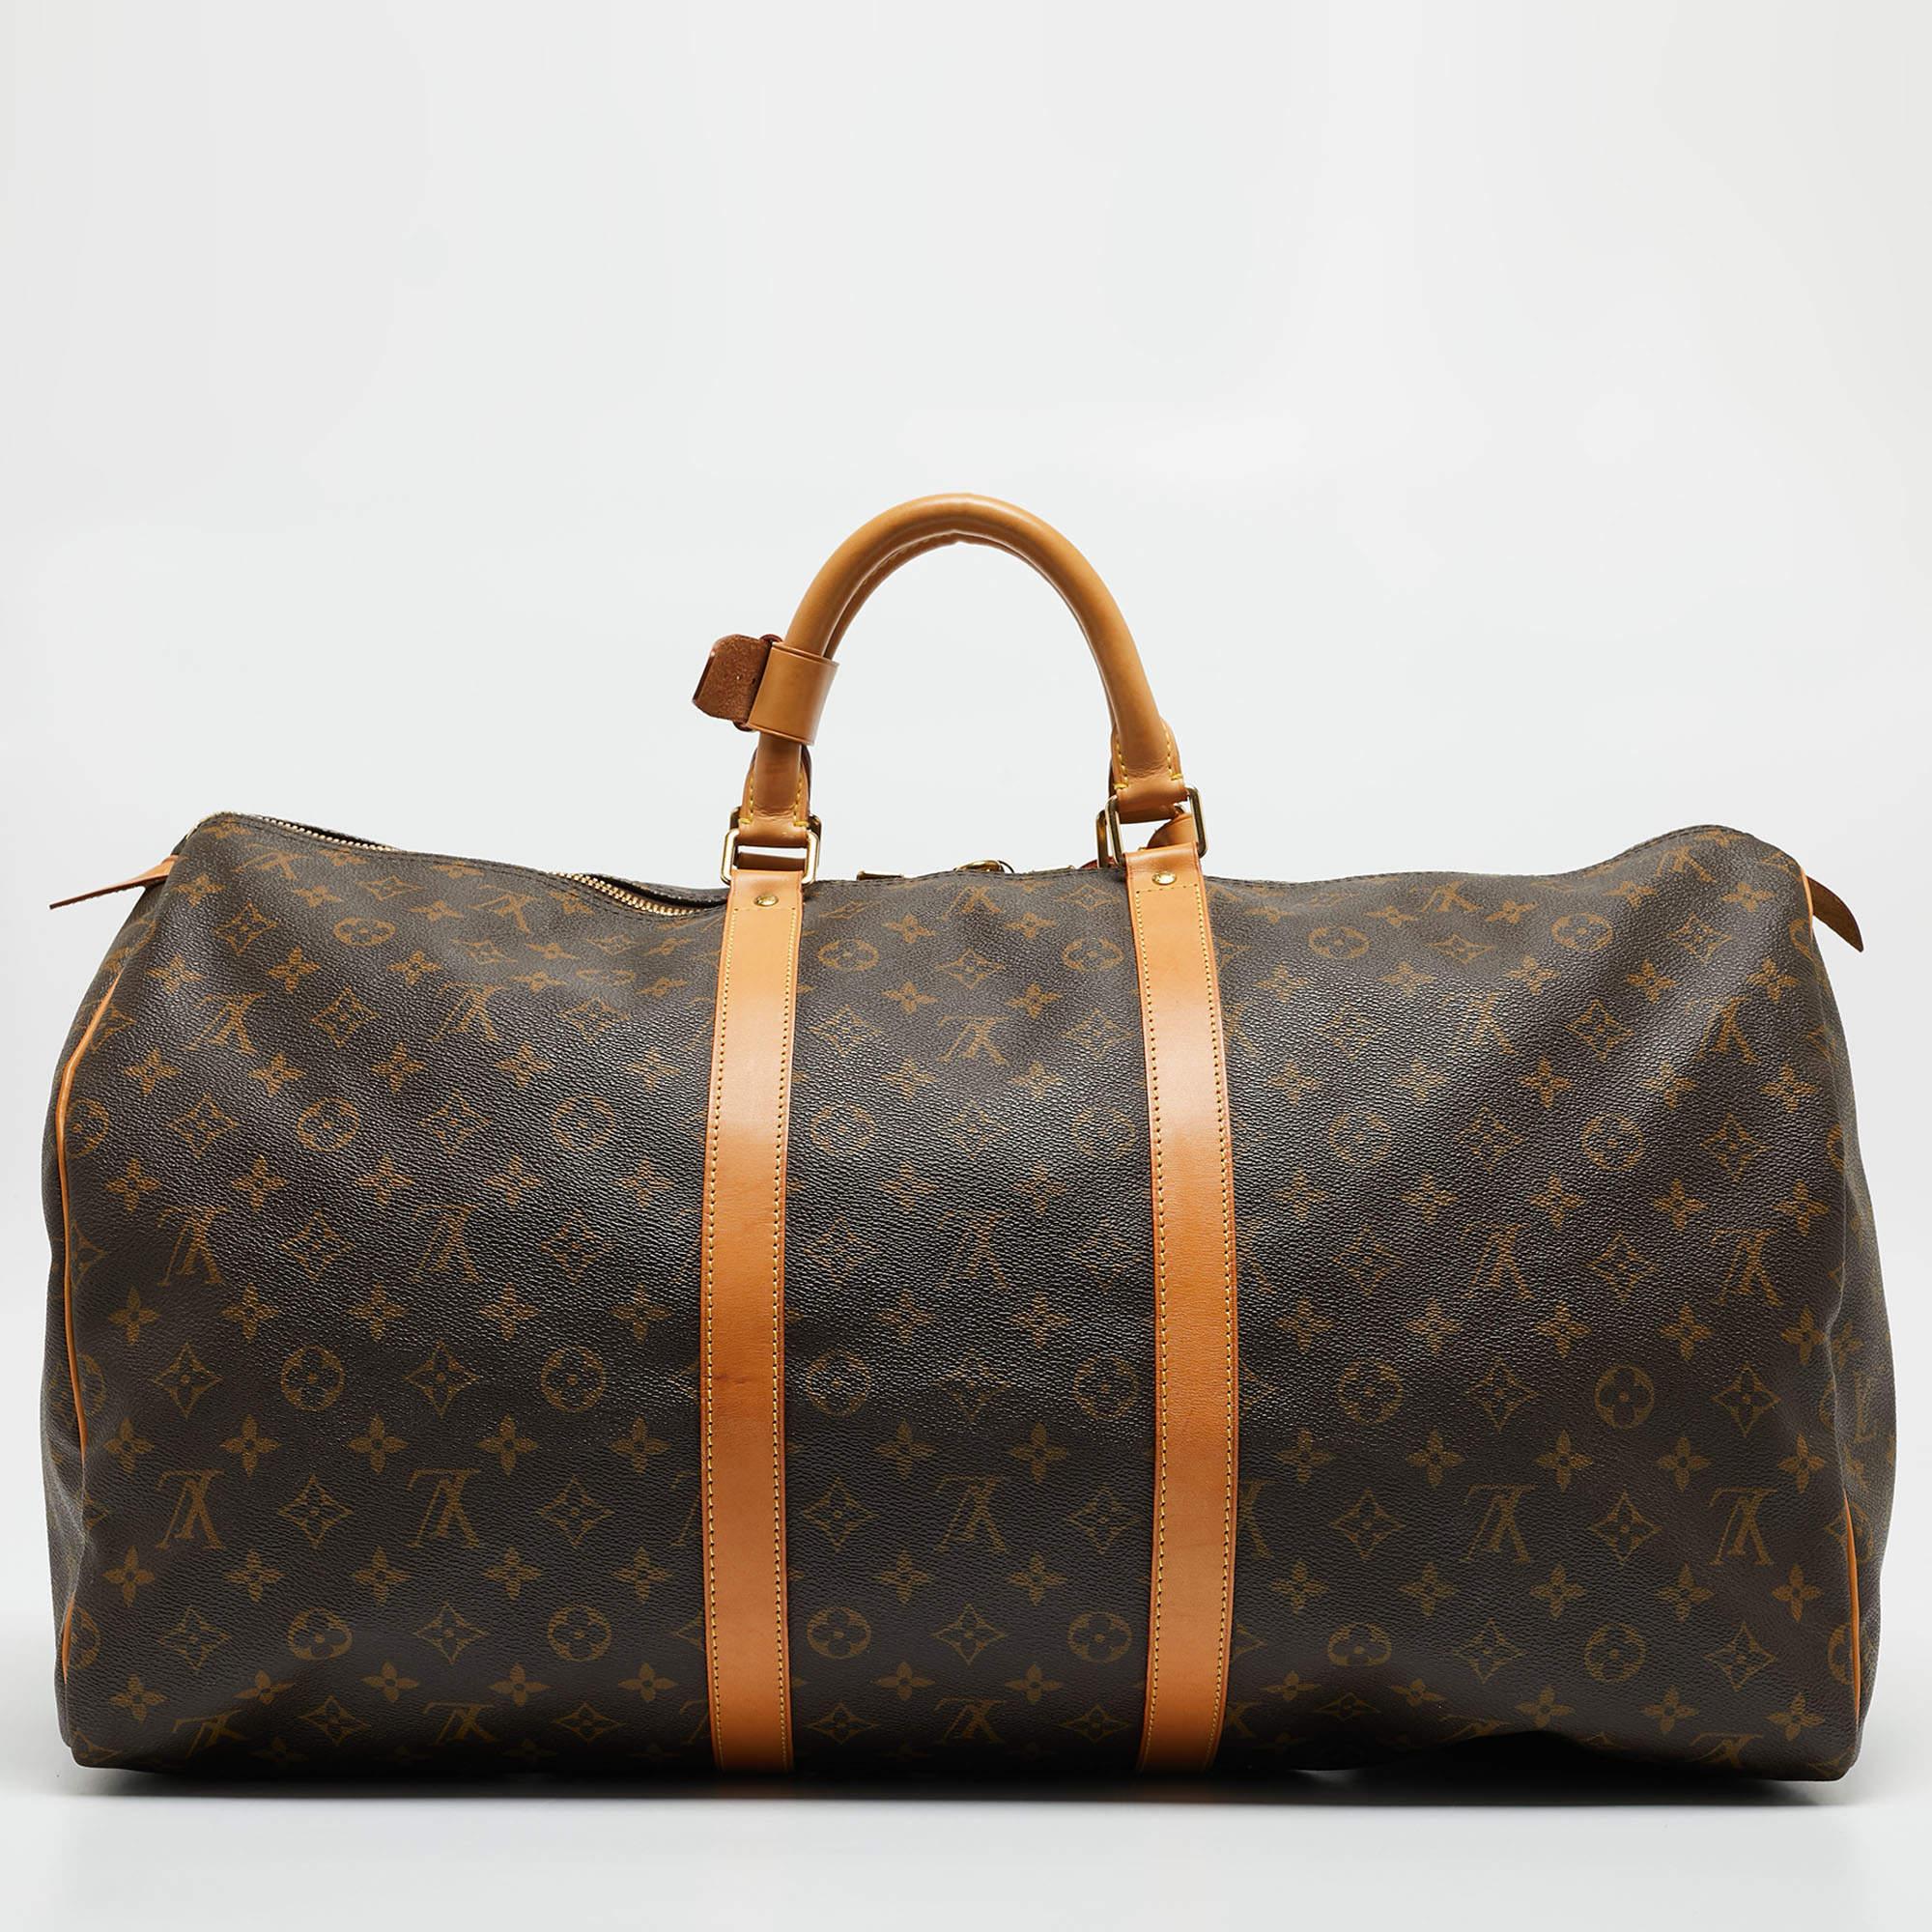 Crafted from iconic Louis Vuitton Monogram Canvas, the Keepall 55 Bag epitomizes luxury travel. Its spacious interior accommodates essentials with ease, while sturdy leather handles and trim exude sophistication. Timeless yet contemporary, this